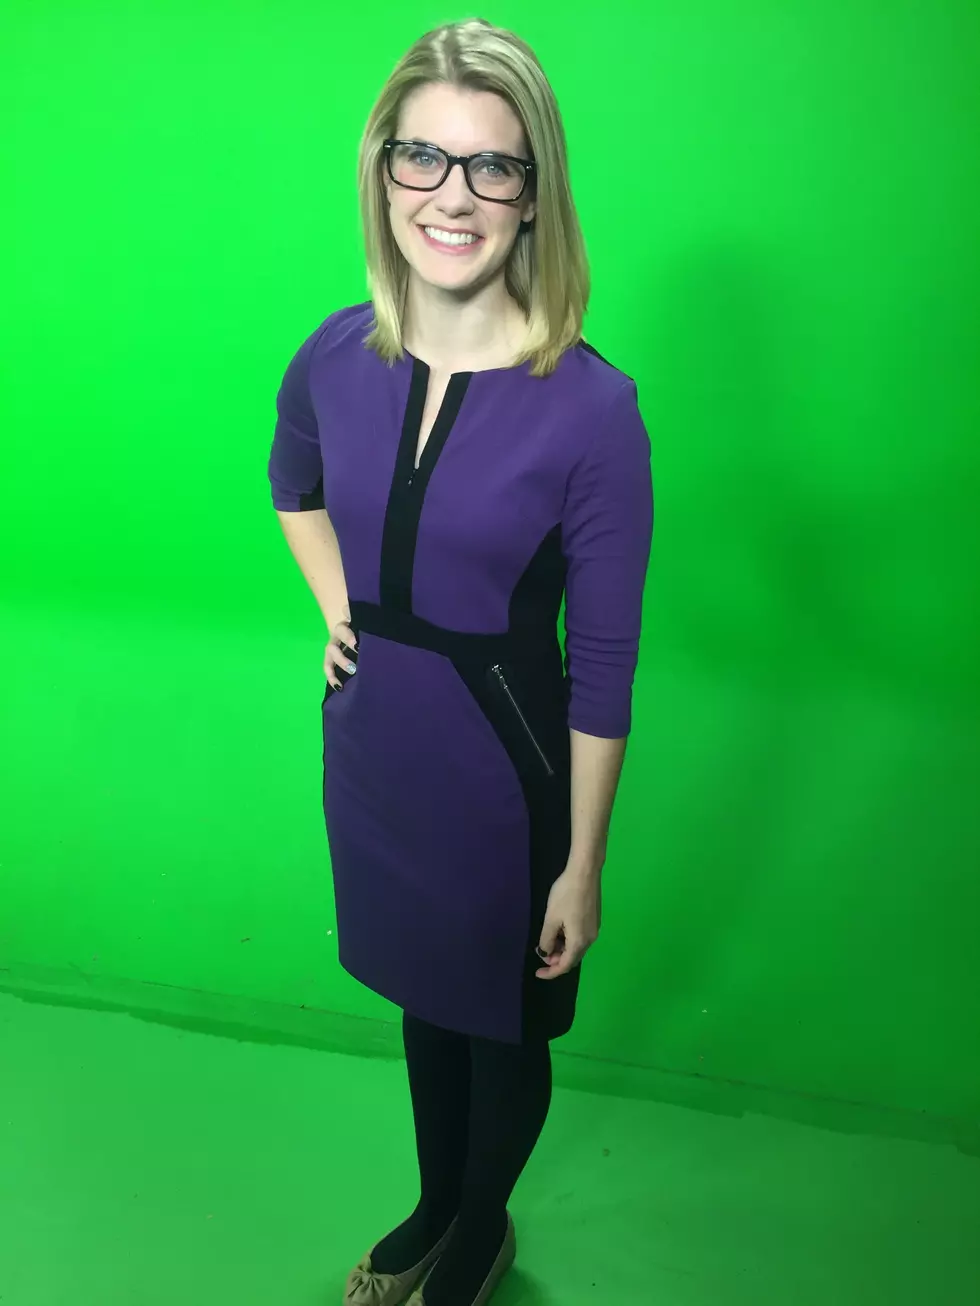 Rachael Witter Wears ‘The Dress’  As Inspiration On Pi Day